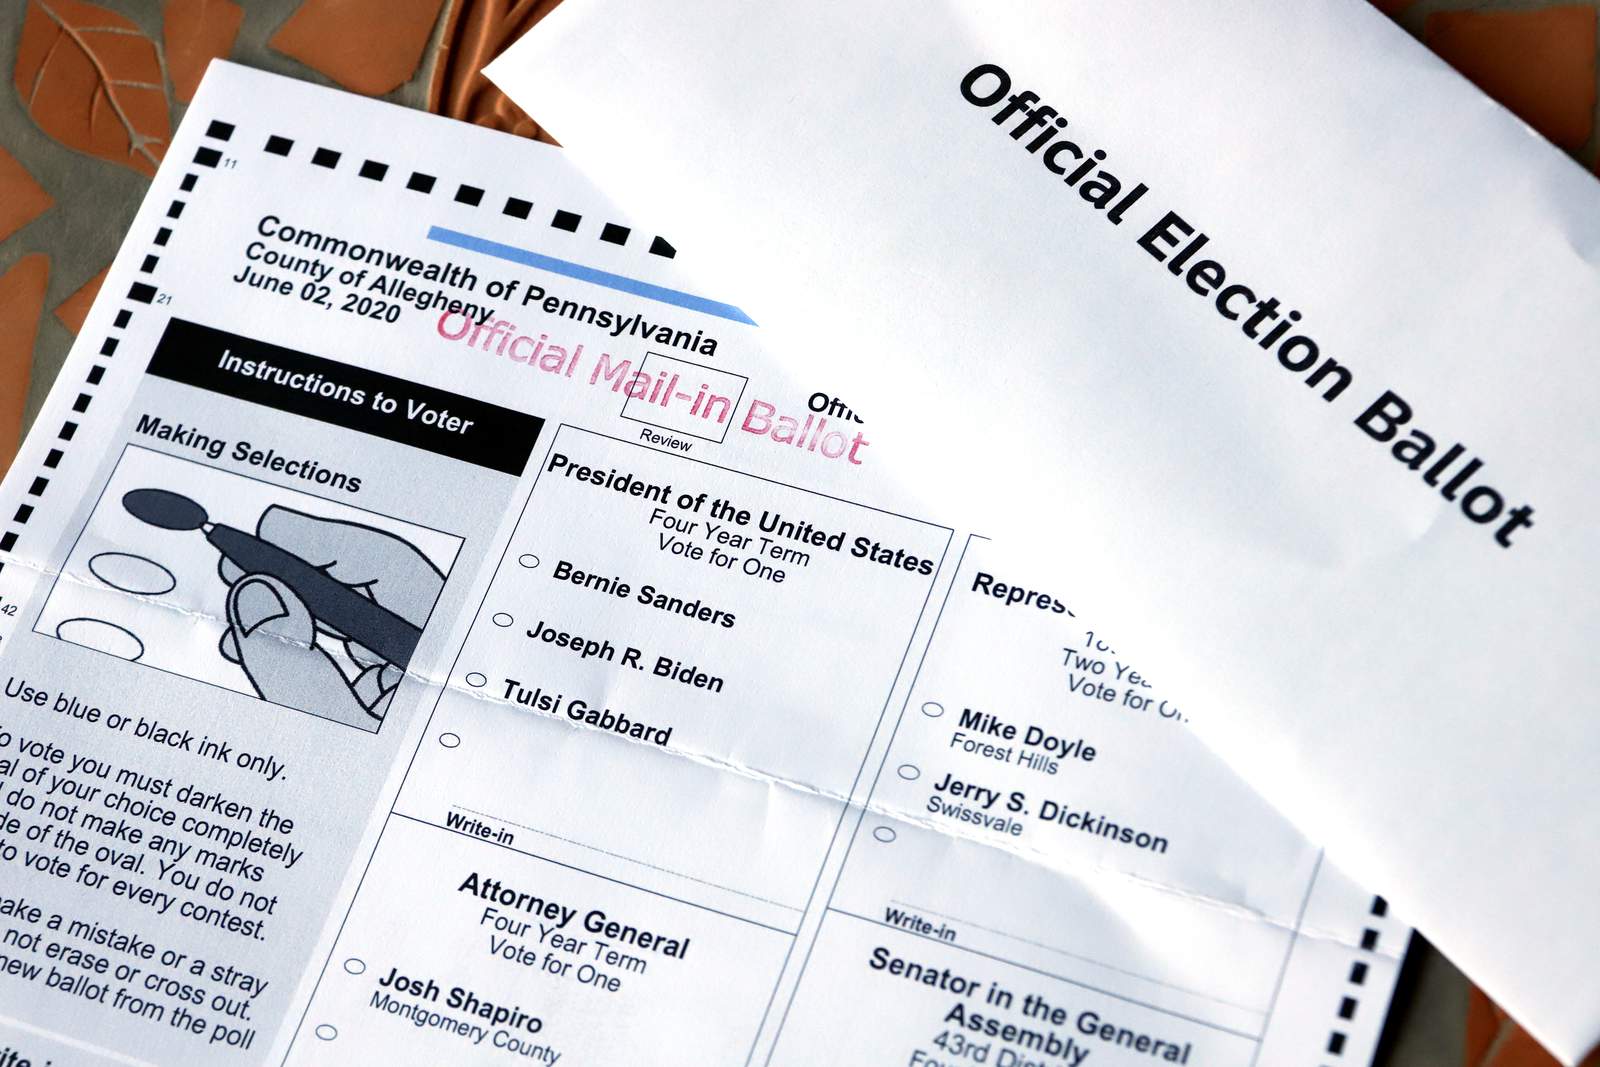 9 discarded ballots weren’t fraud, Pennsylvania state election chief says